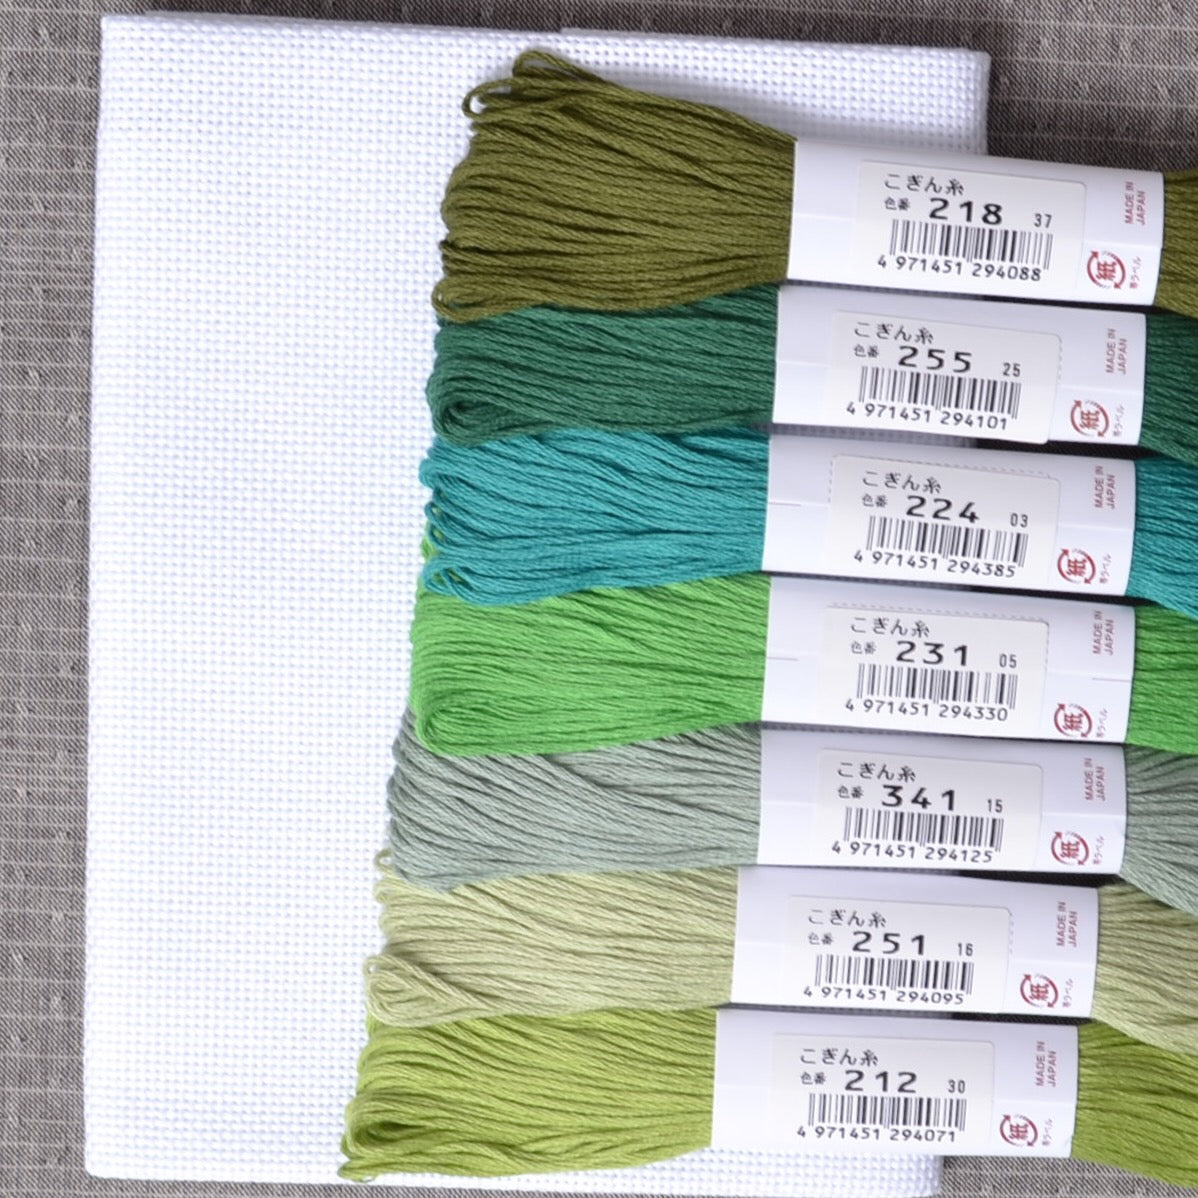 Kogin Stitching, 18 Count Taupe Grey Cloth shown with green Kogin threads